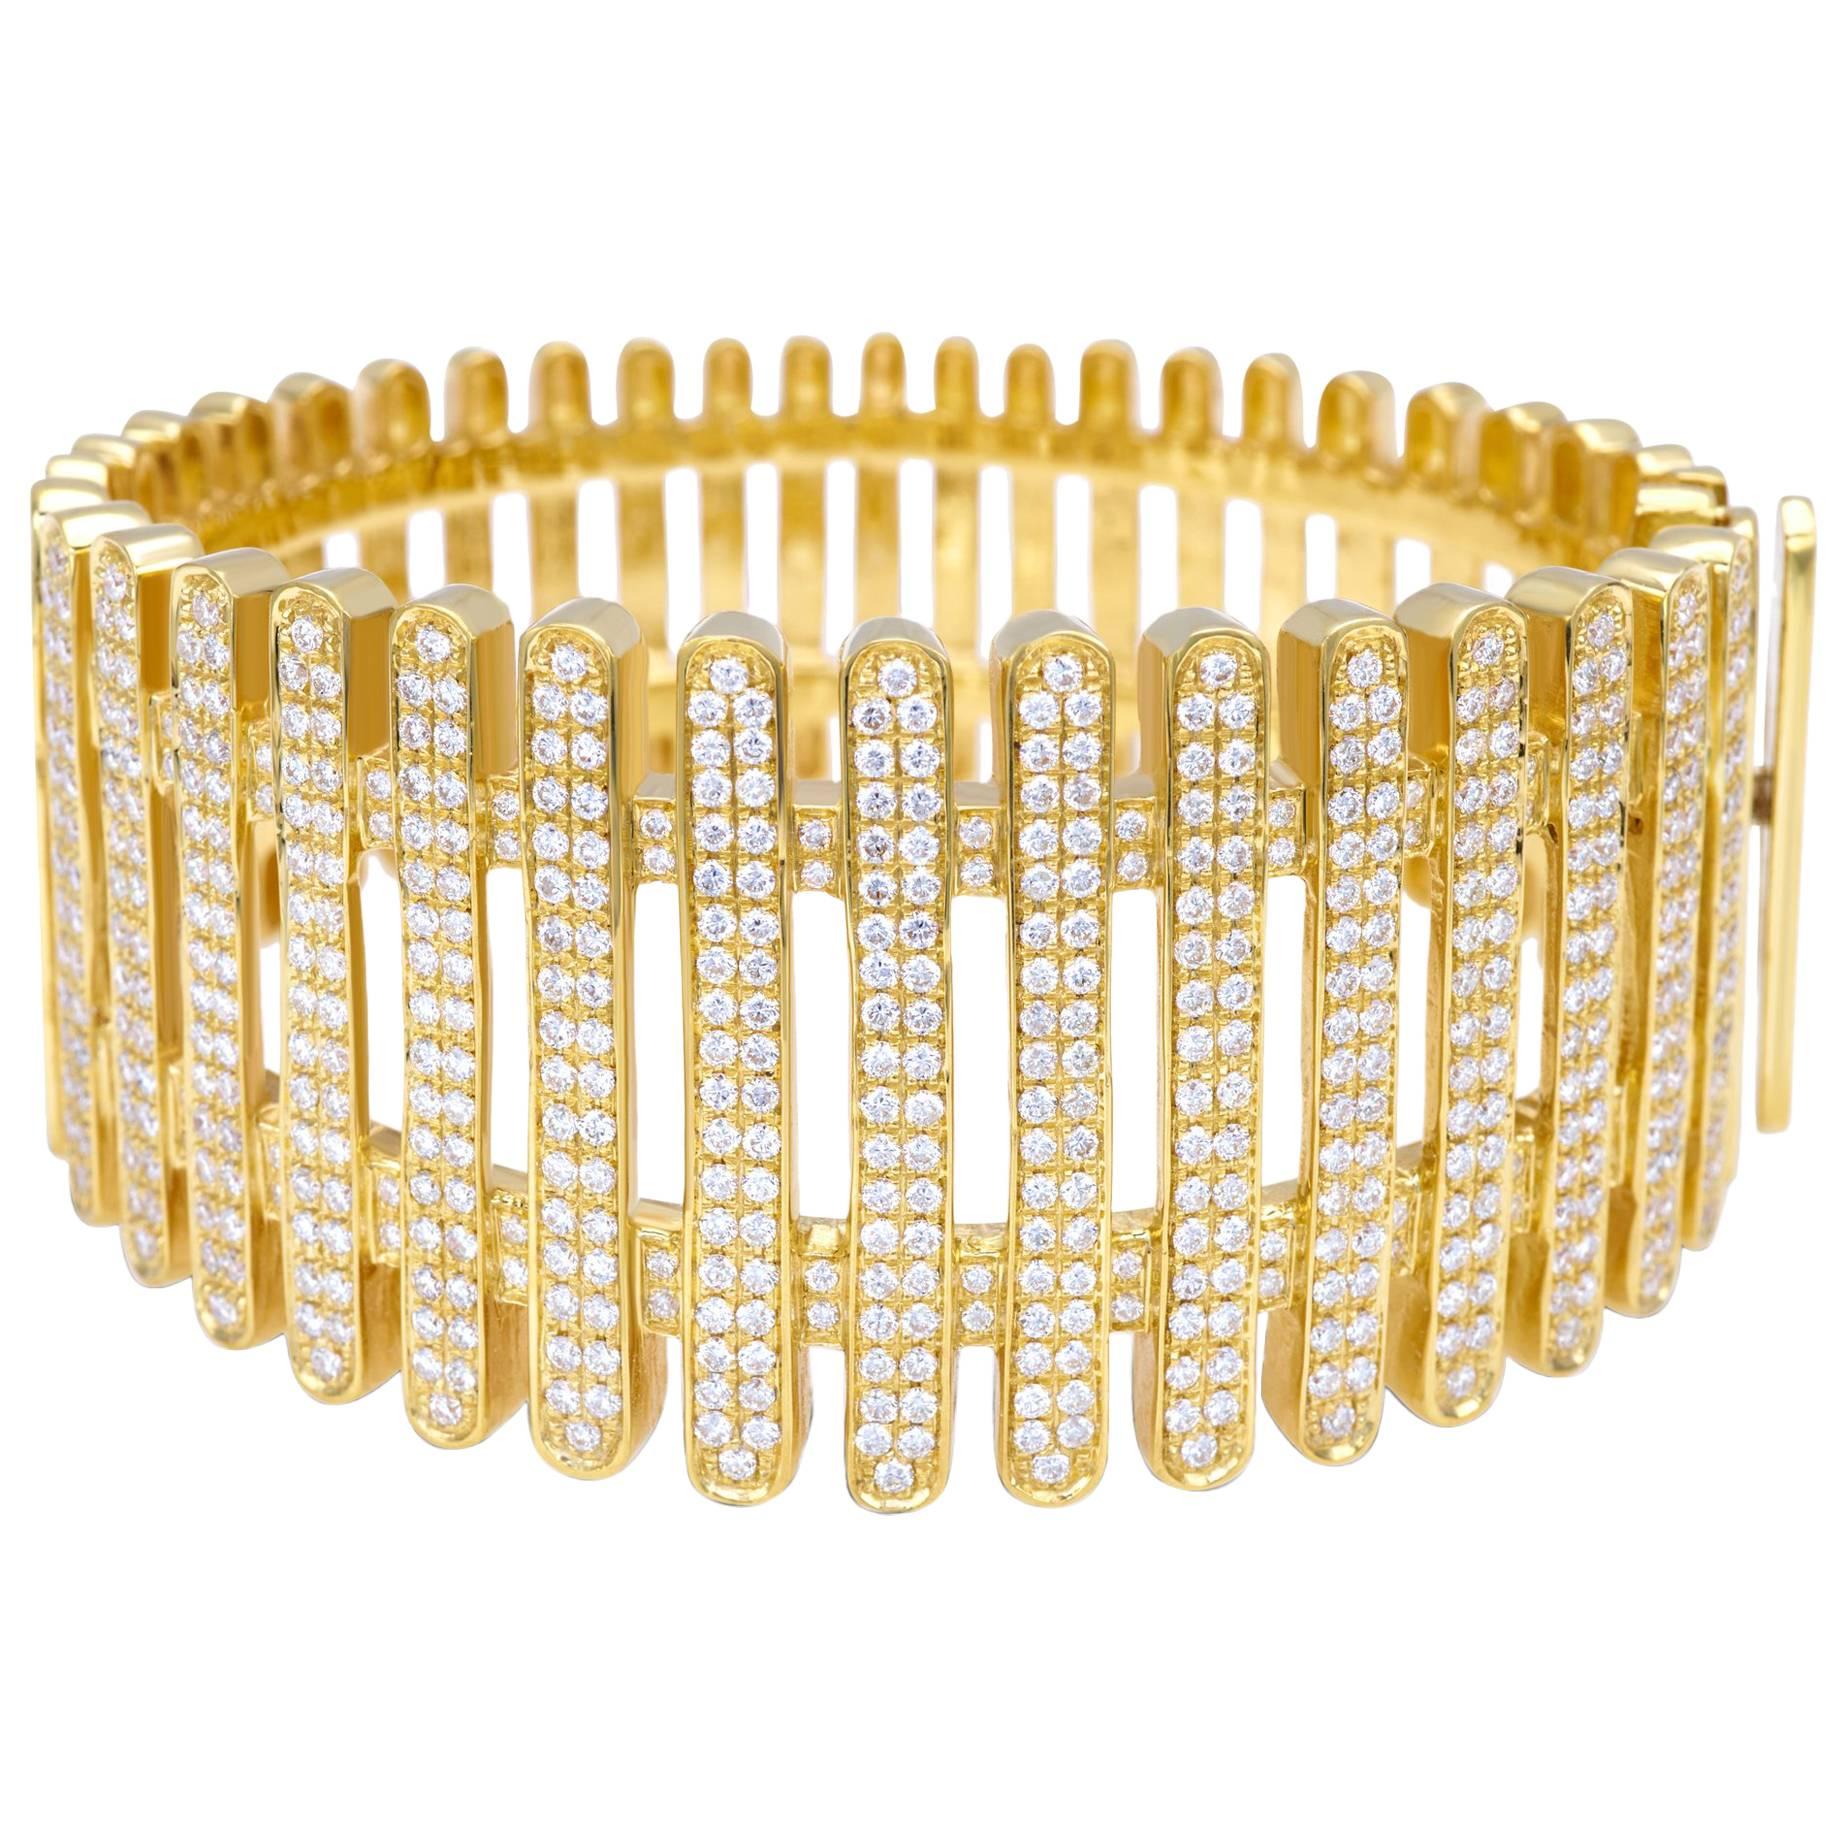 Bangle from the Collection "Moonlight" 18 Karat Yellow Gold and Diamonds